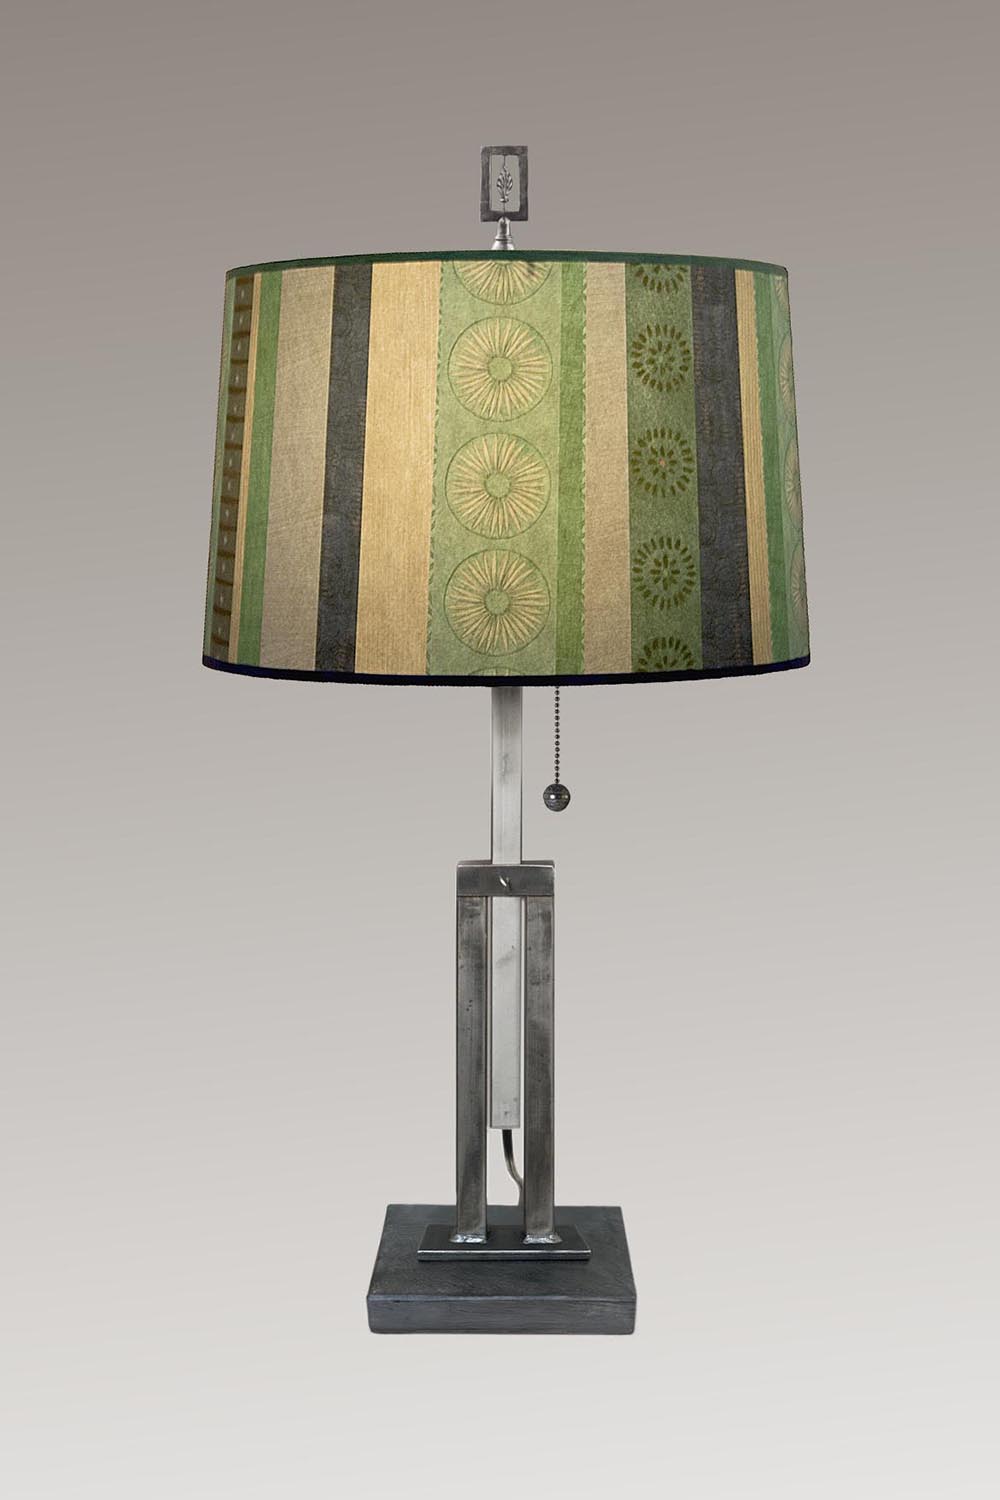 Janna Ugone &amp; Co Table Lamps Adjustable-Height Steel Table Lamp with Large Drum Shade in Serape Waters